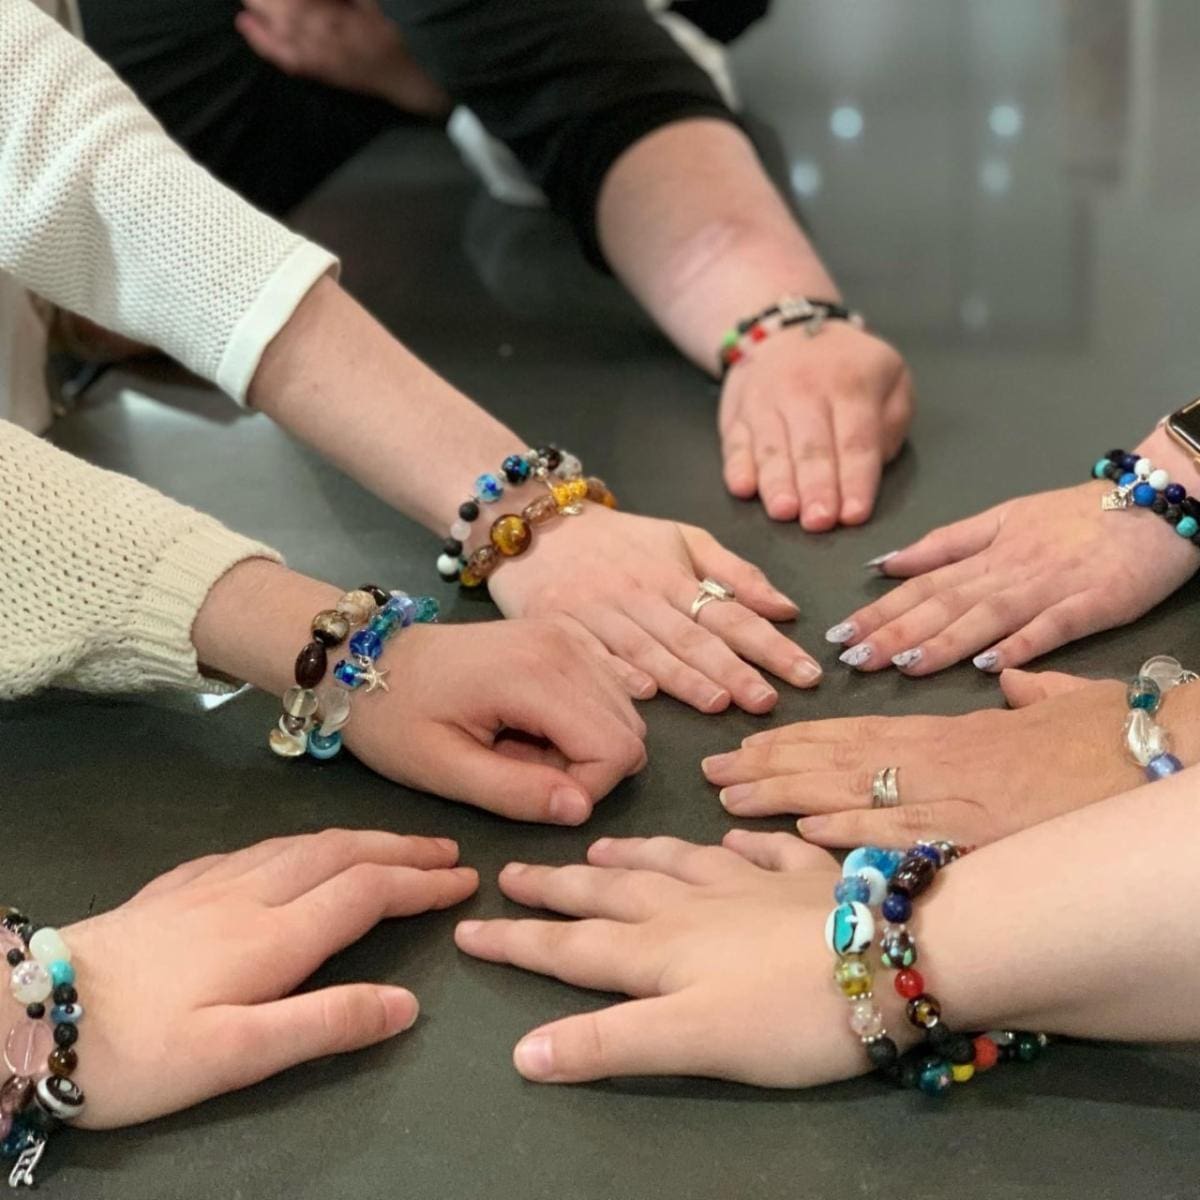 several arms together showing off colourful bracelets